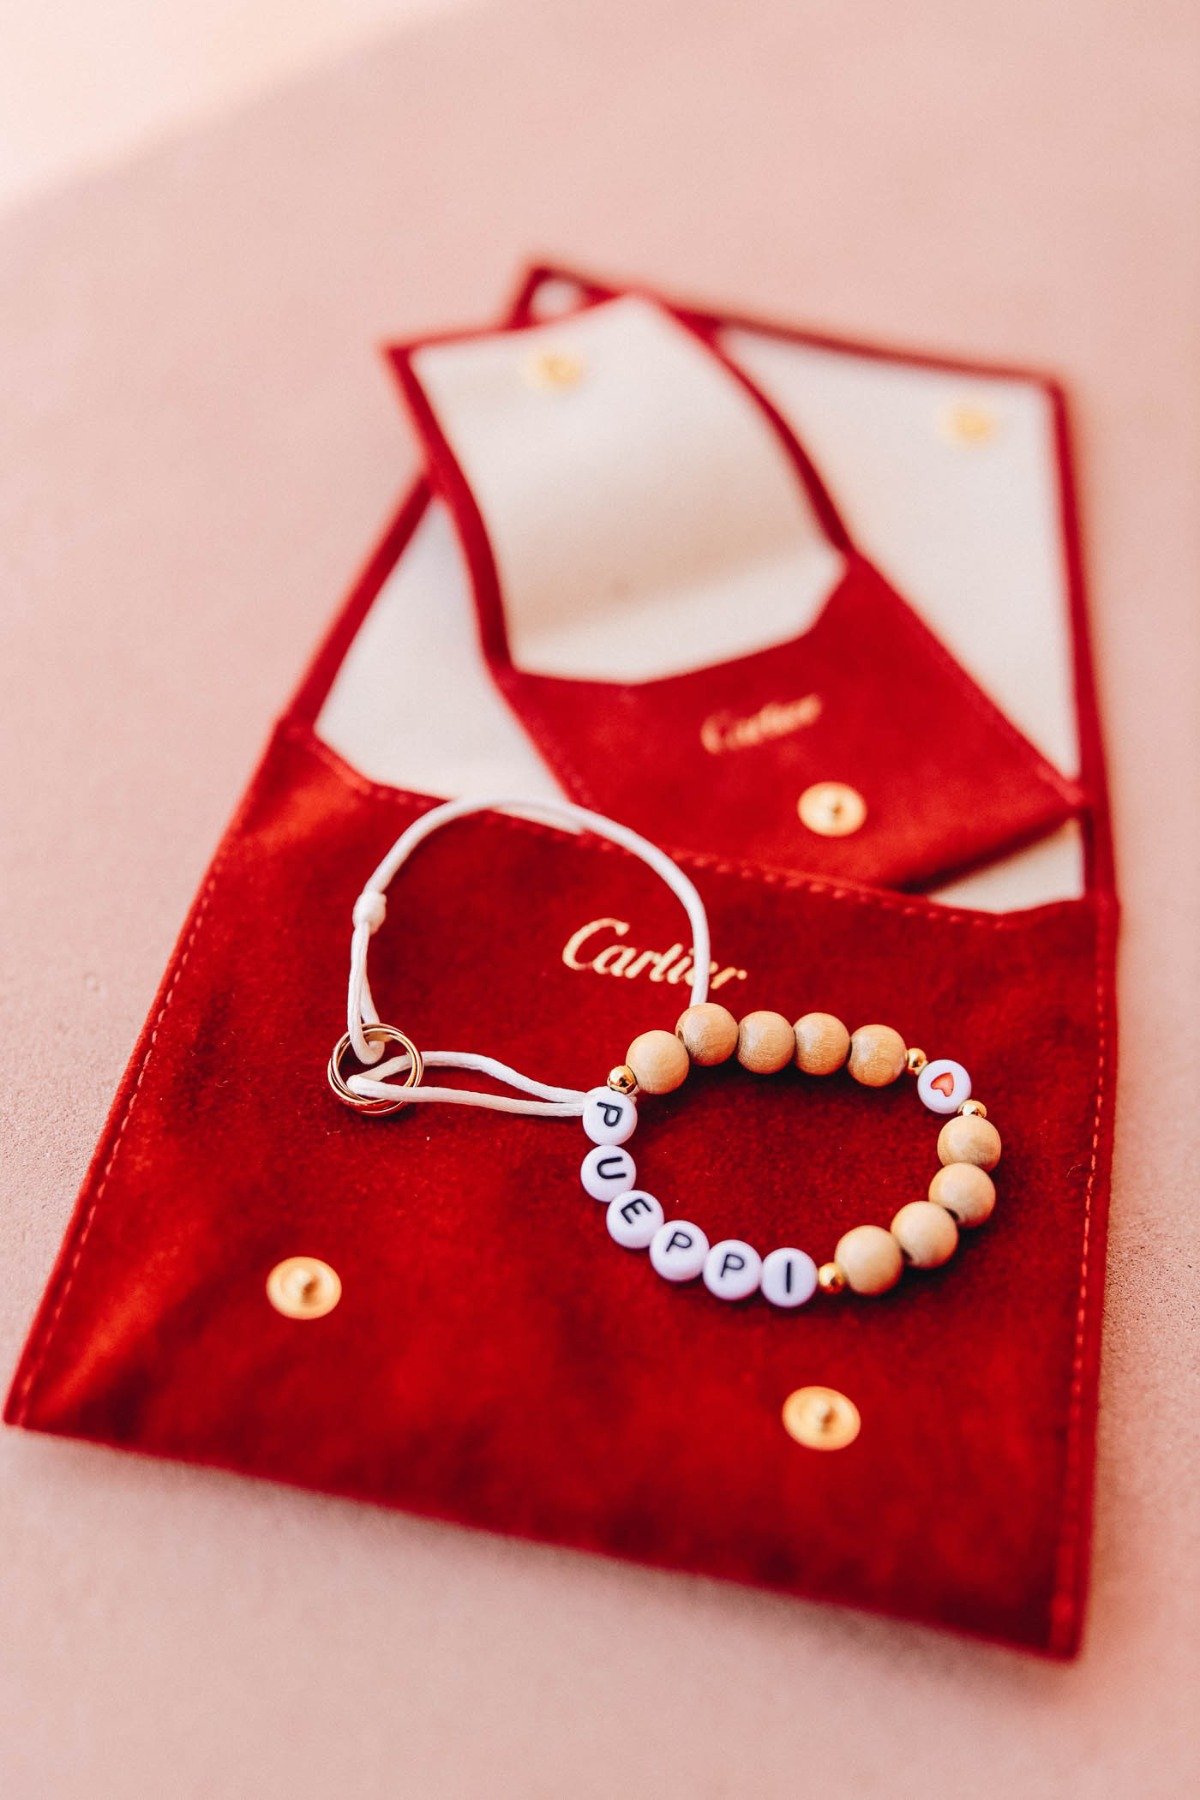 Cartier wedding jewelry for baby